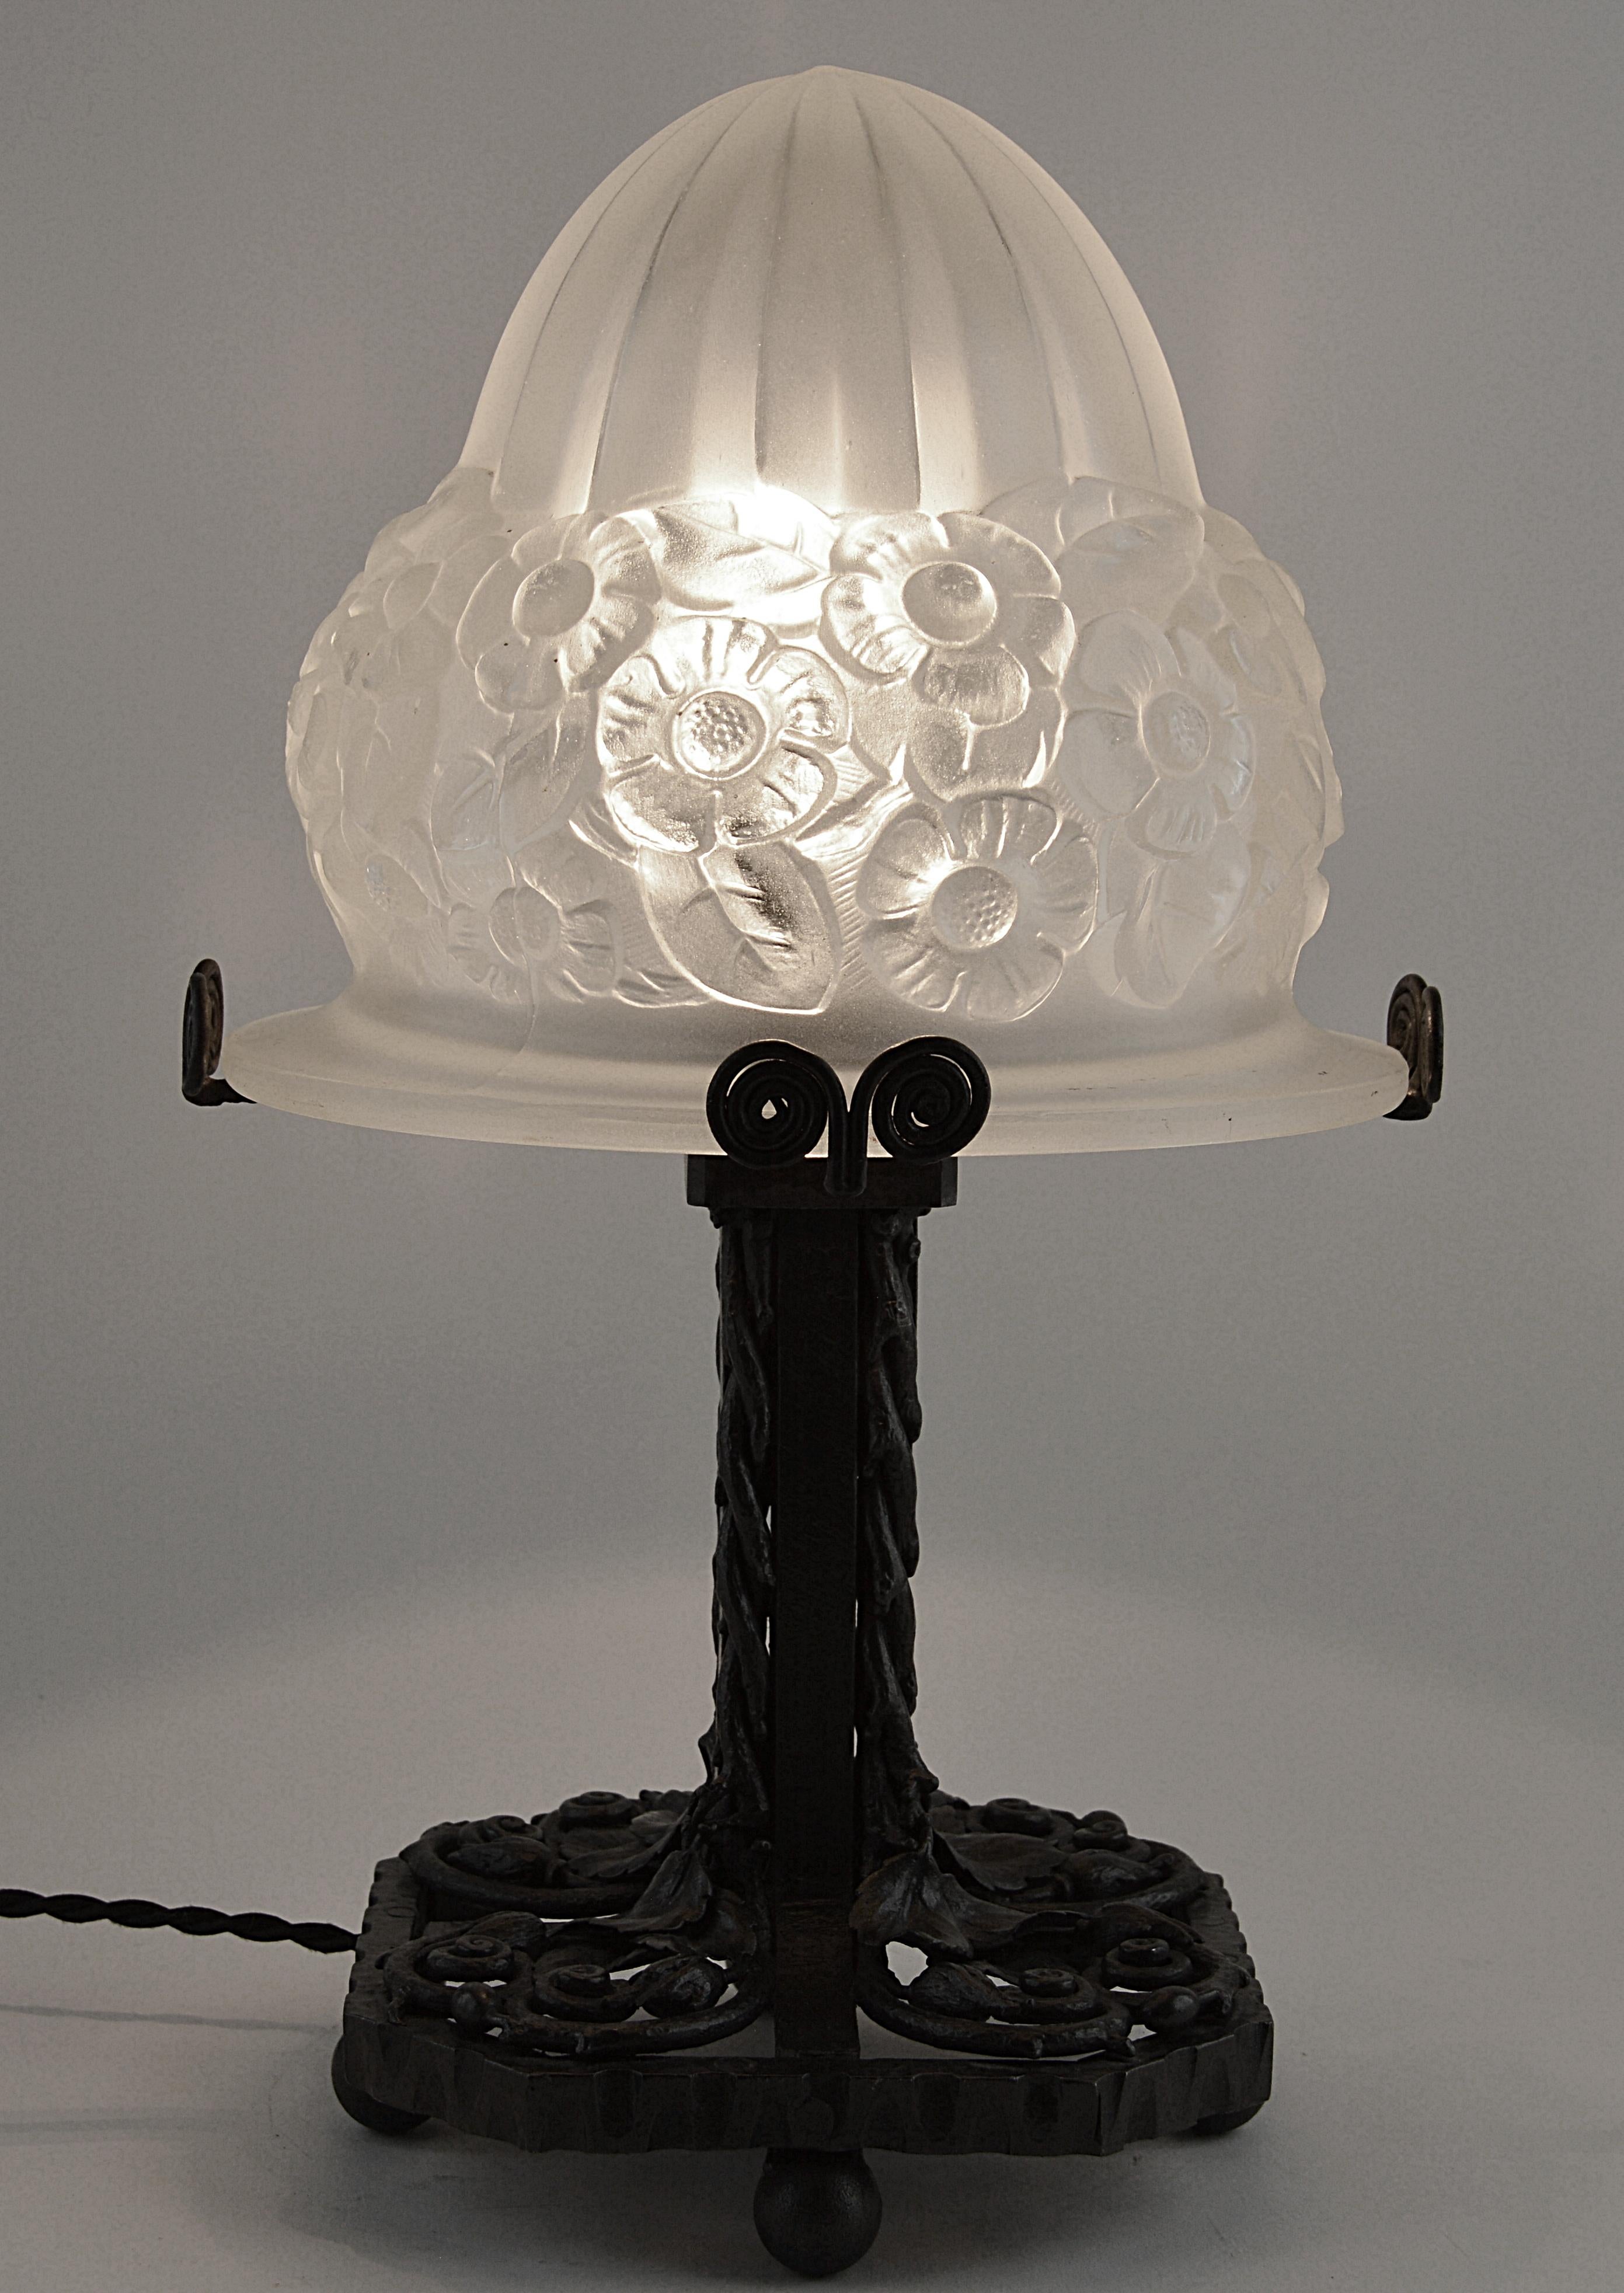 French Art Deco table lamp by Pierre Gilles, 27 rue Esquirol, Paris 13e, France, circa 1930. Glass and wrought iron. Same period as Hettier-Vincent, Muller Freres, Degue, Charles Schneider. Thick white molded glass shade very slightly yellowing.